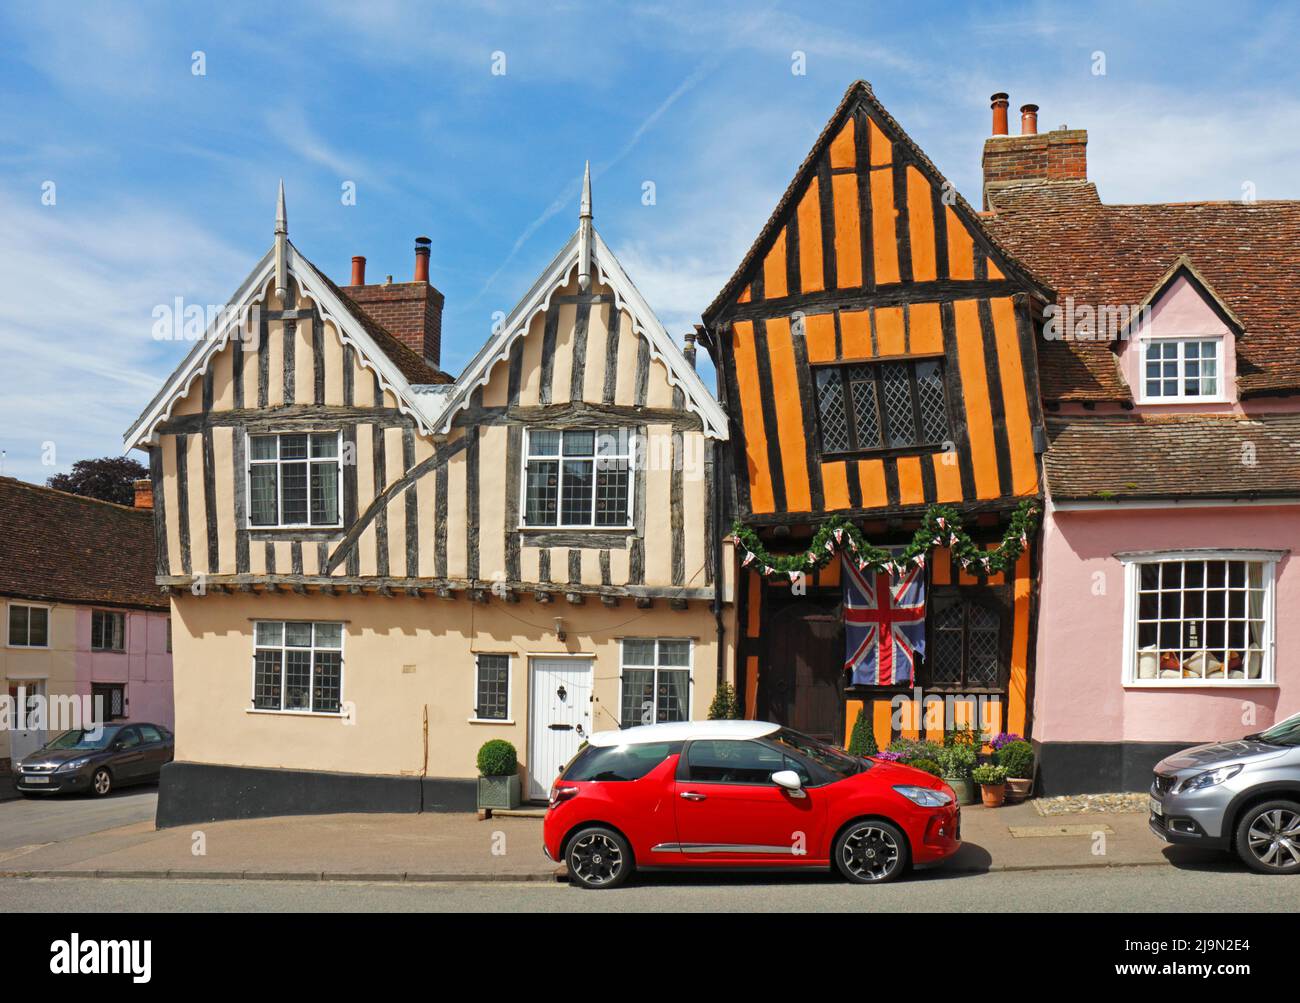 A view of The Crooked House, an orange coloured half-timbered historical house in the medieval village of Lavenham, Suffolk, England, UK. Stock Photo